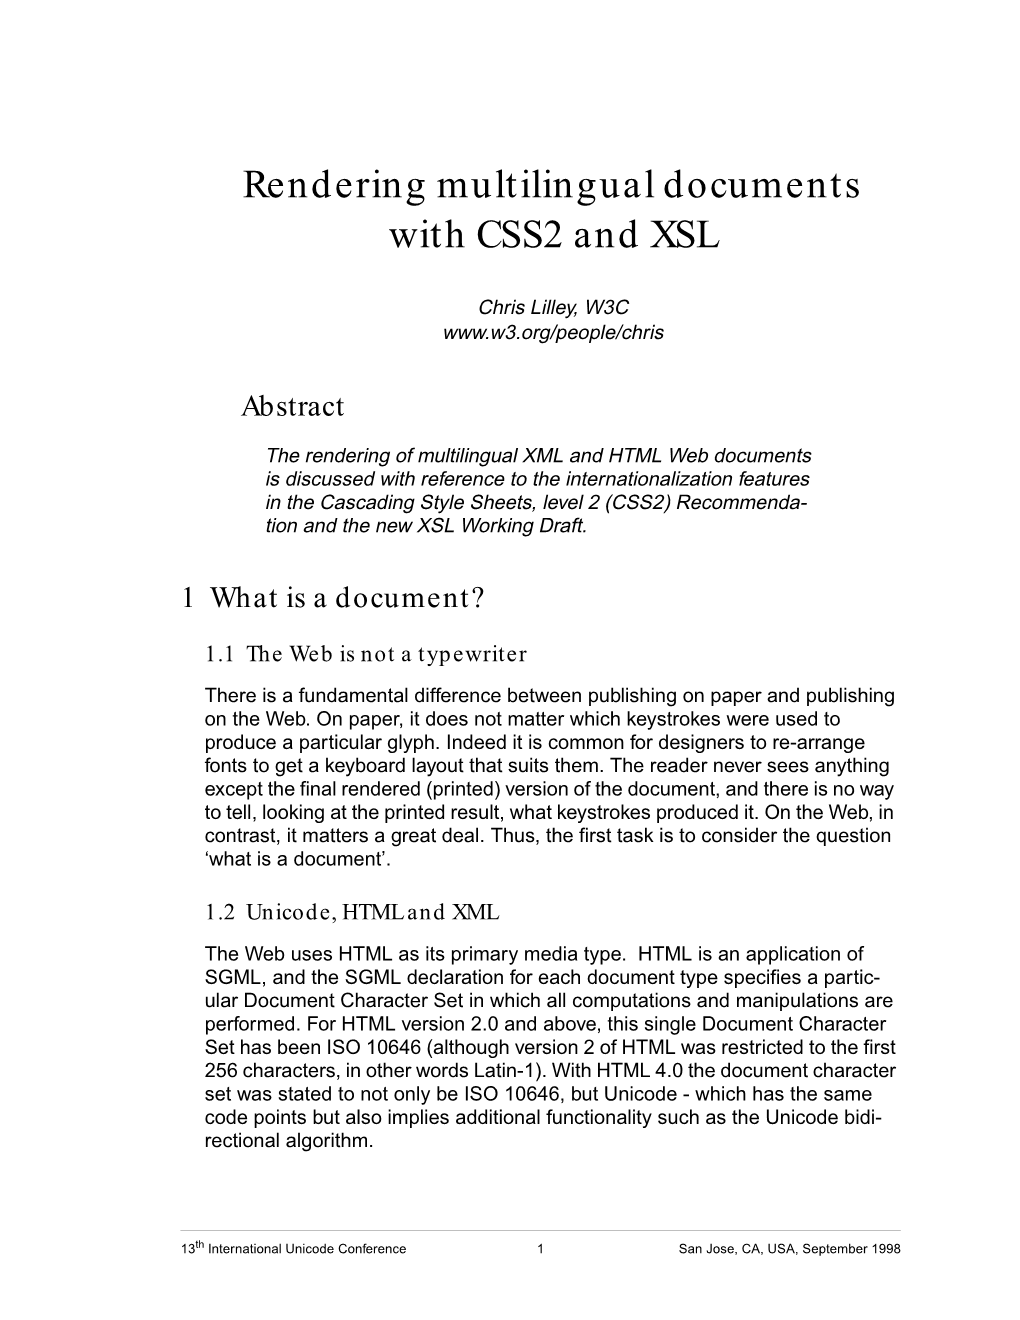 Rendering Multilingual Documents with CSS And